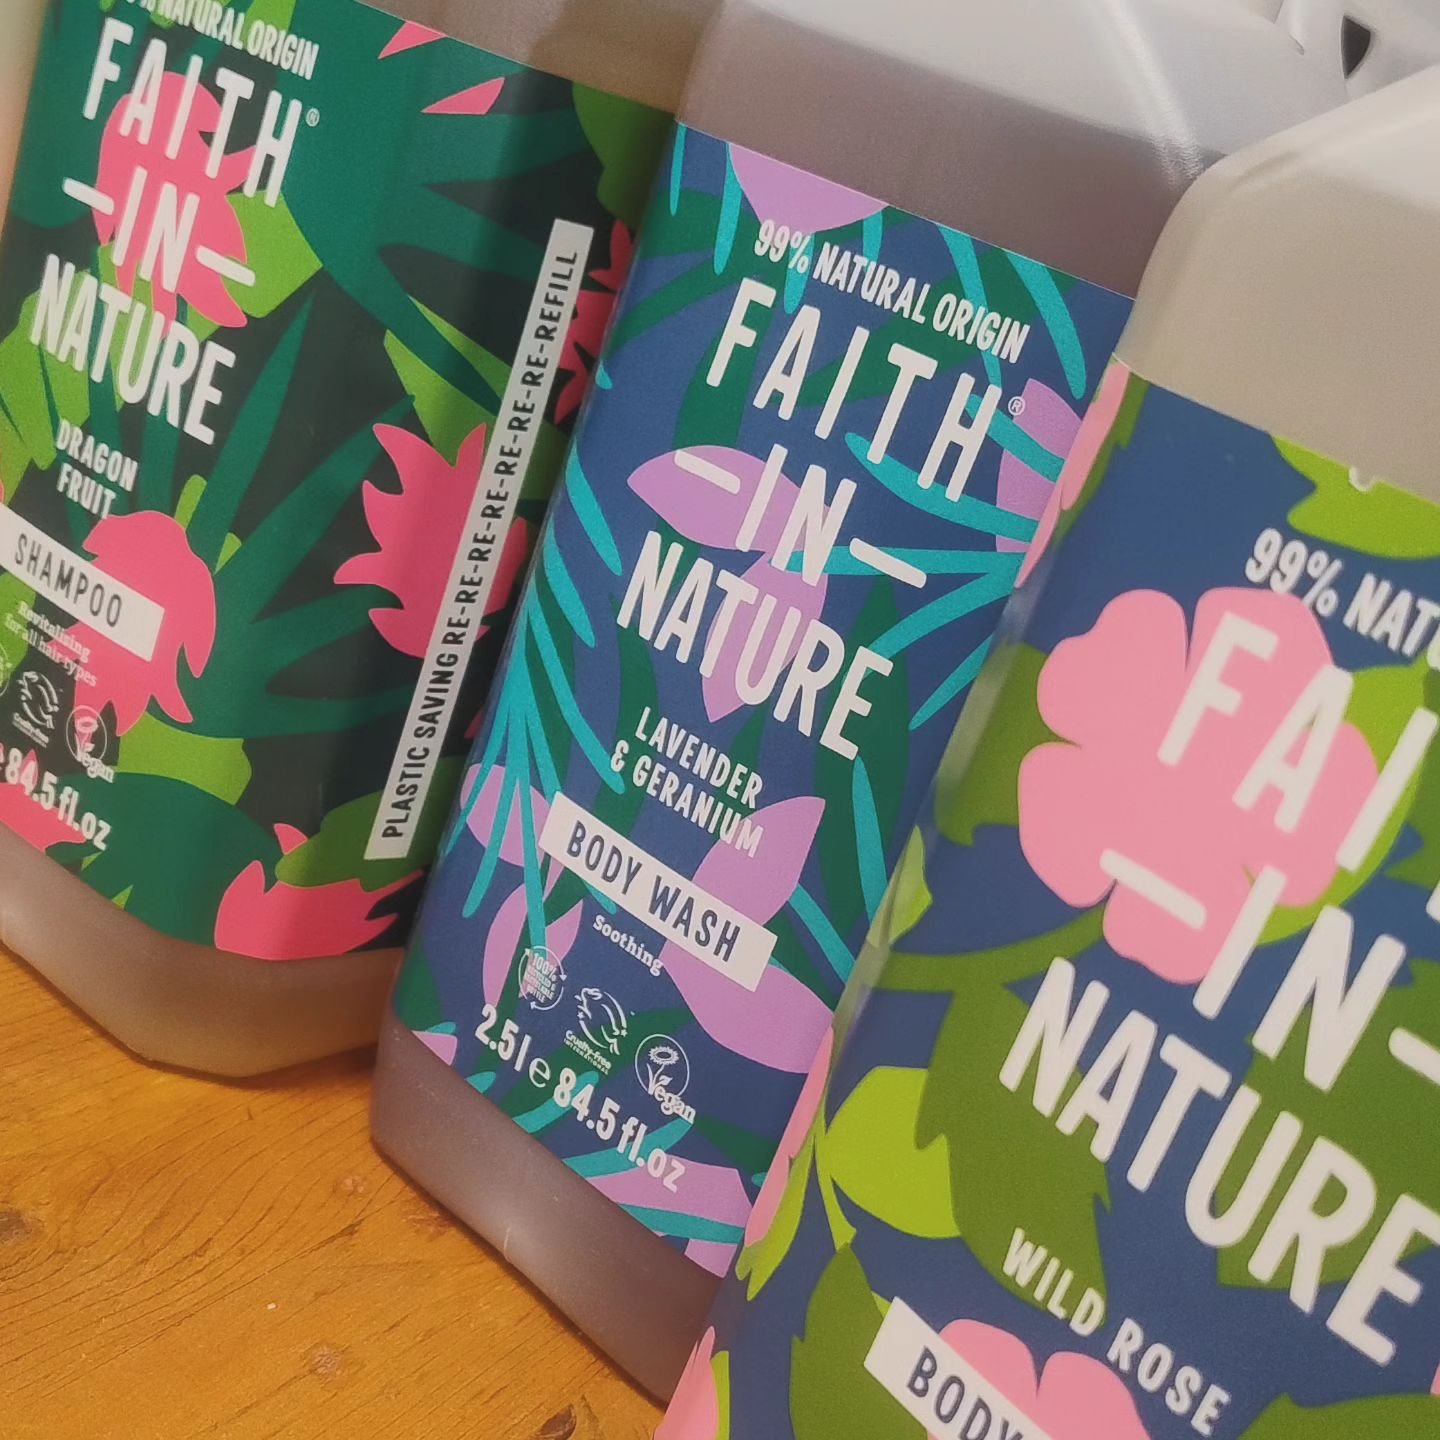 *SPECIAL OFFER*

Faith in Nature 2.5 litre products: shampoo, conditioner and body wash.

A variety a delicious scents available.

Was: &pound;30.00
Now: &pound;22.00

For a limited time, whilst stocks last. 

Check in store or order online, link in 